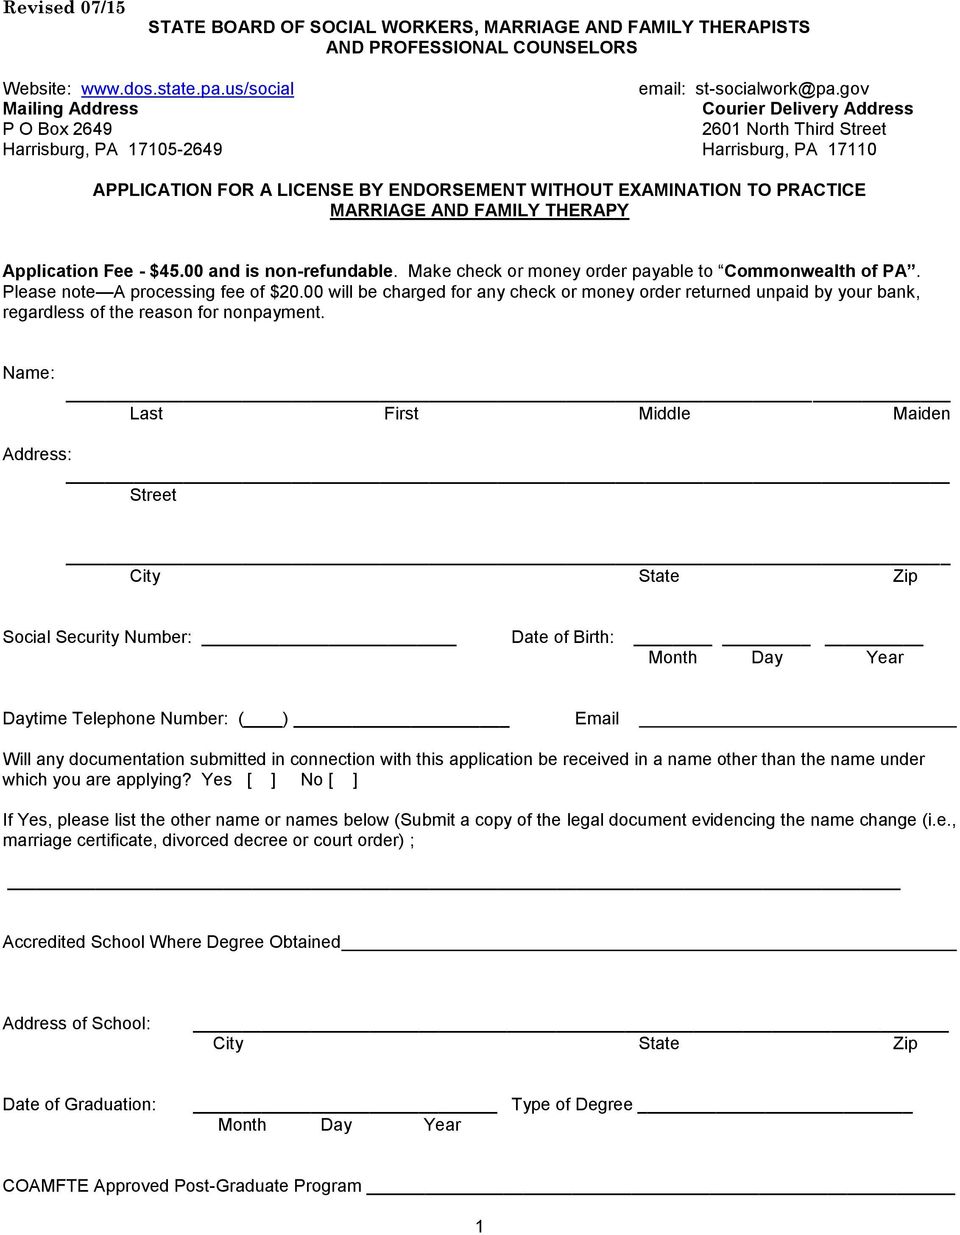 PRACTICE MARRIAGE AND FAMILY THERAPY Application Fee - $45.00 and is non-refundable. Make check or money order payable to Commonwealth of PA. Please note A processing fee of $20.